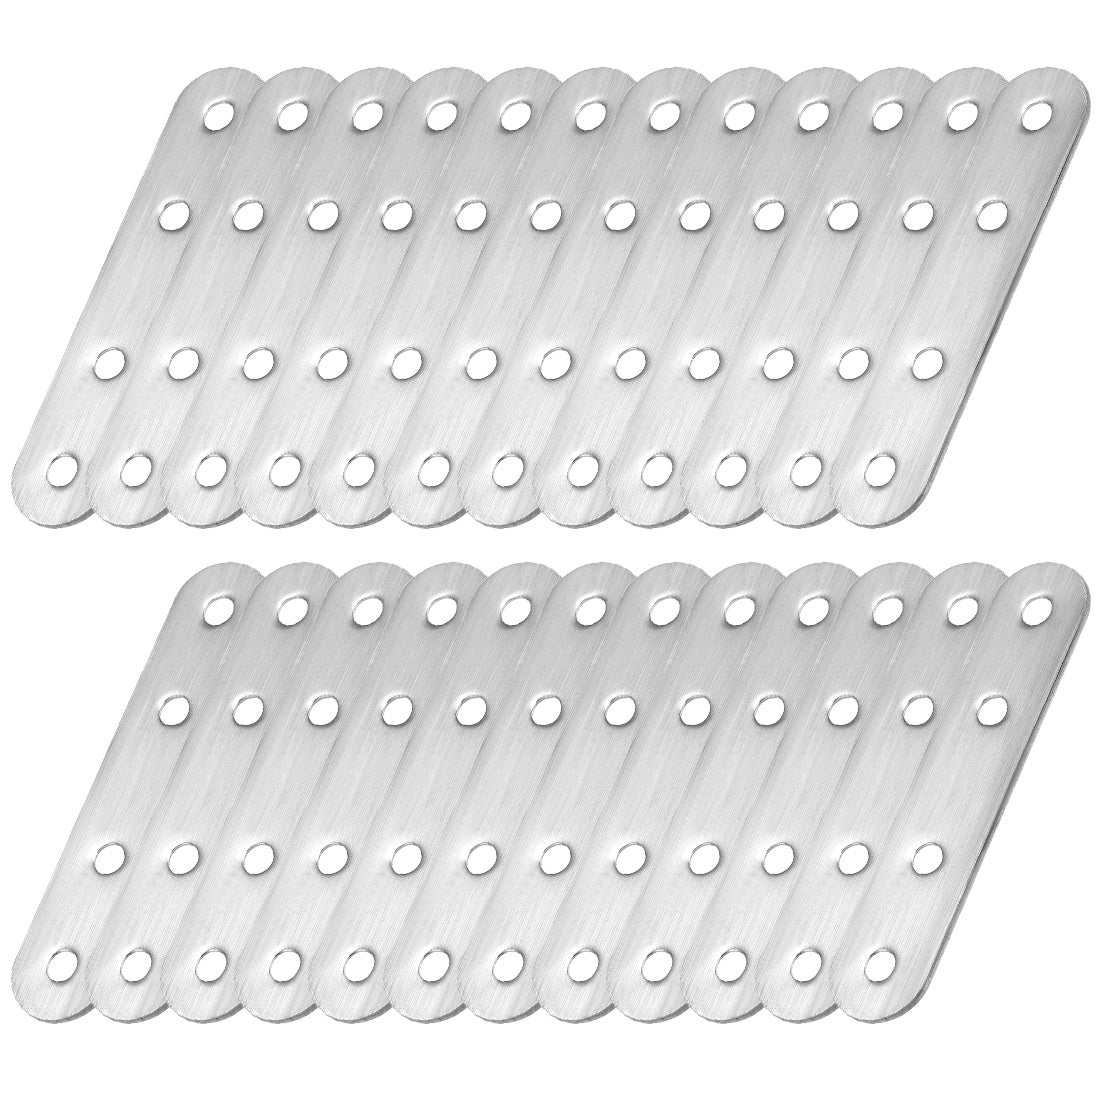 uxcell Uxcell Repair Plate, 80mm x 17mm, Flat Fixing Mending Bracket Connector with Screws, 24 Pcs